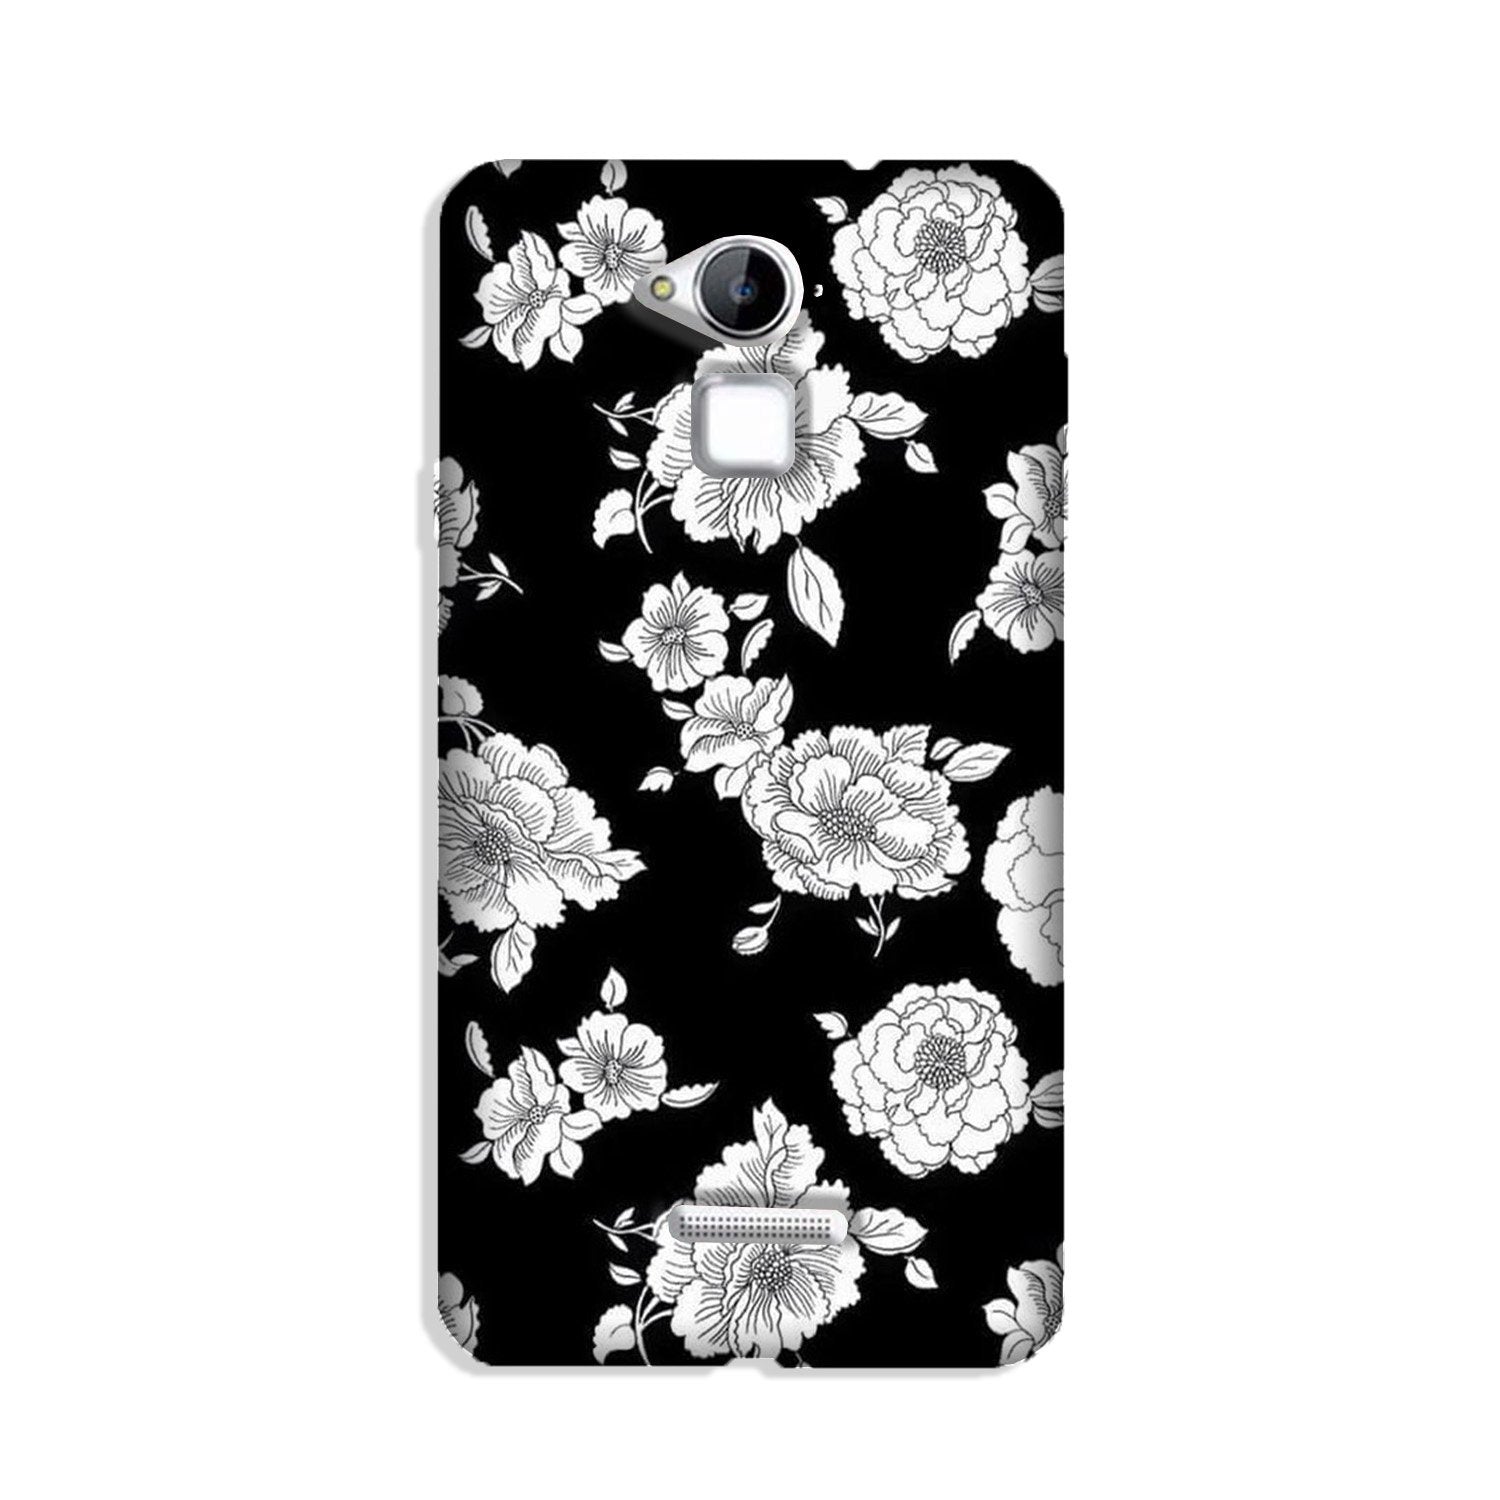 White flowers Black Background Case for Coolpad Note 3